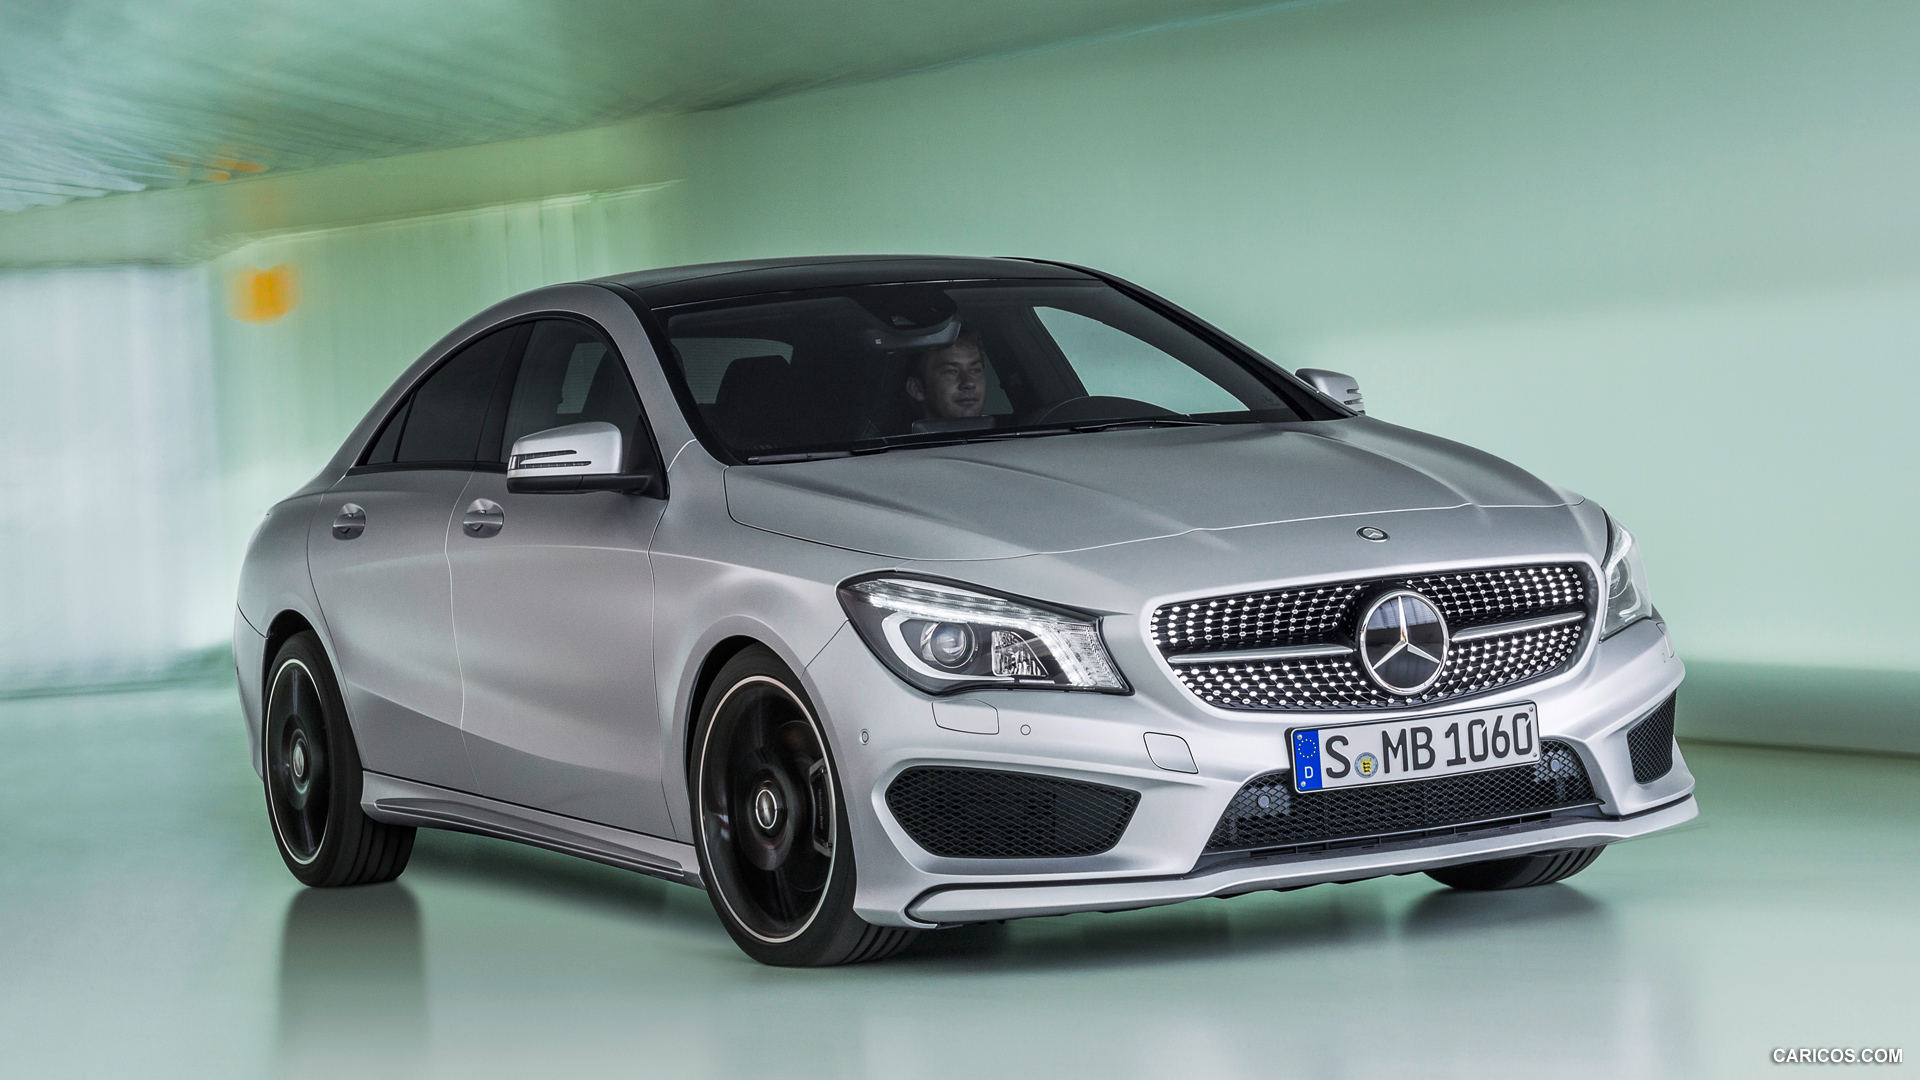 2014 Mercedes-Benz CLA-Class CLA 250 Edition 1 - Front, #35 of 183